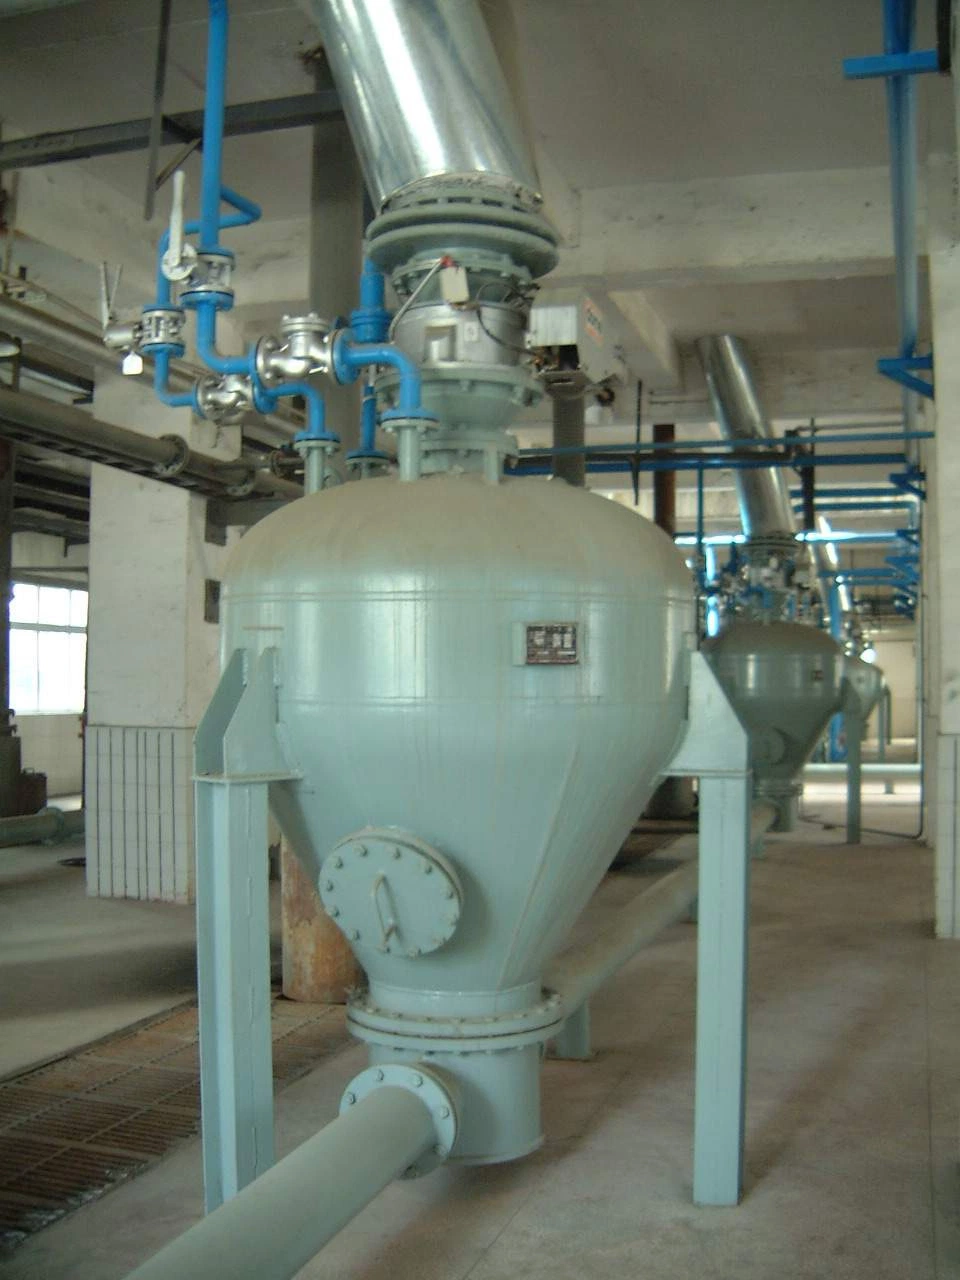 Pneumatic Conveying System and Equipment